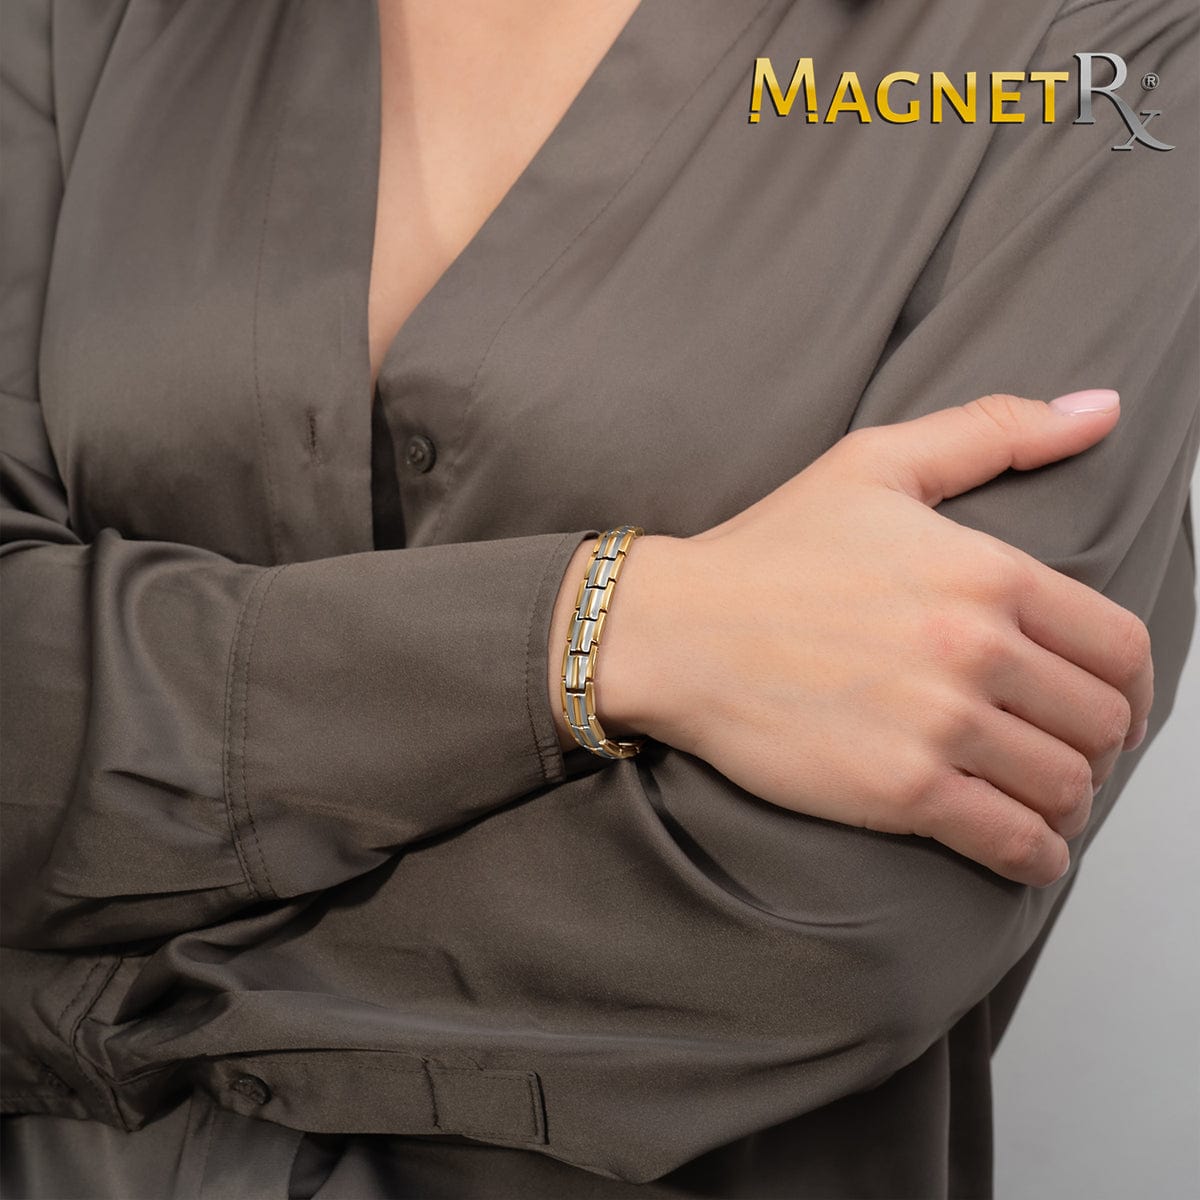 Amazon.com: MagnetRX® Women's Ultra Strength Magnetic Therapy Bracelet -  Arthritis Pain Relief & Carpal Tunnel Titanium Magnetic Bracelets for Women  - Adjustable Bracelet Length with Sizing Tool (Gold) : Health & Household